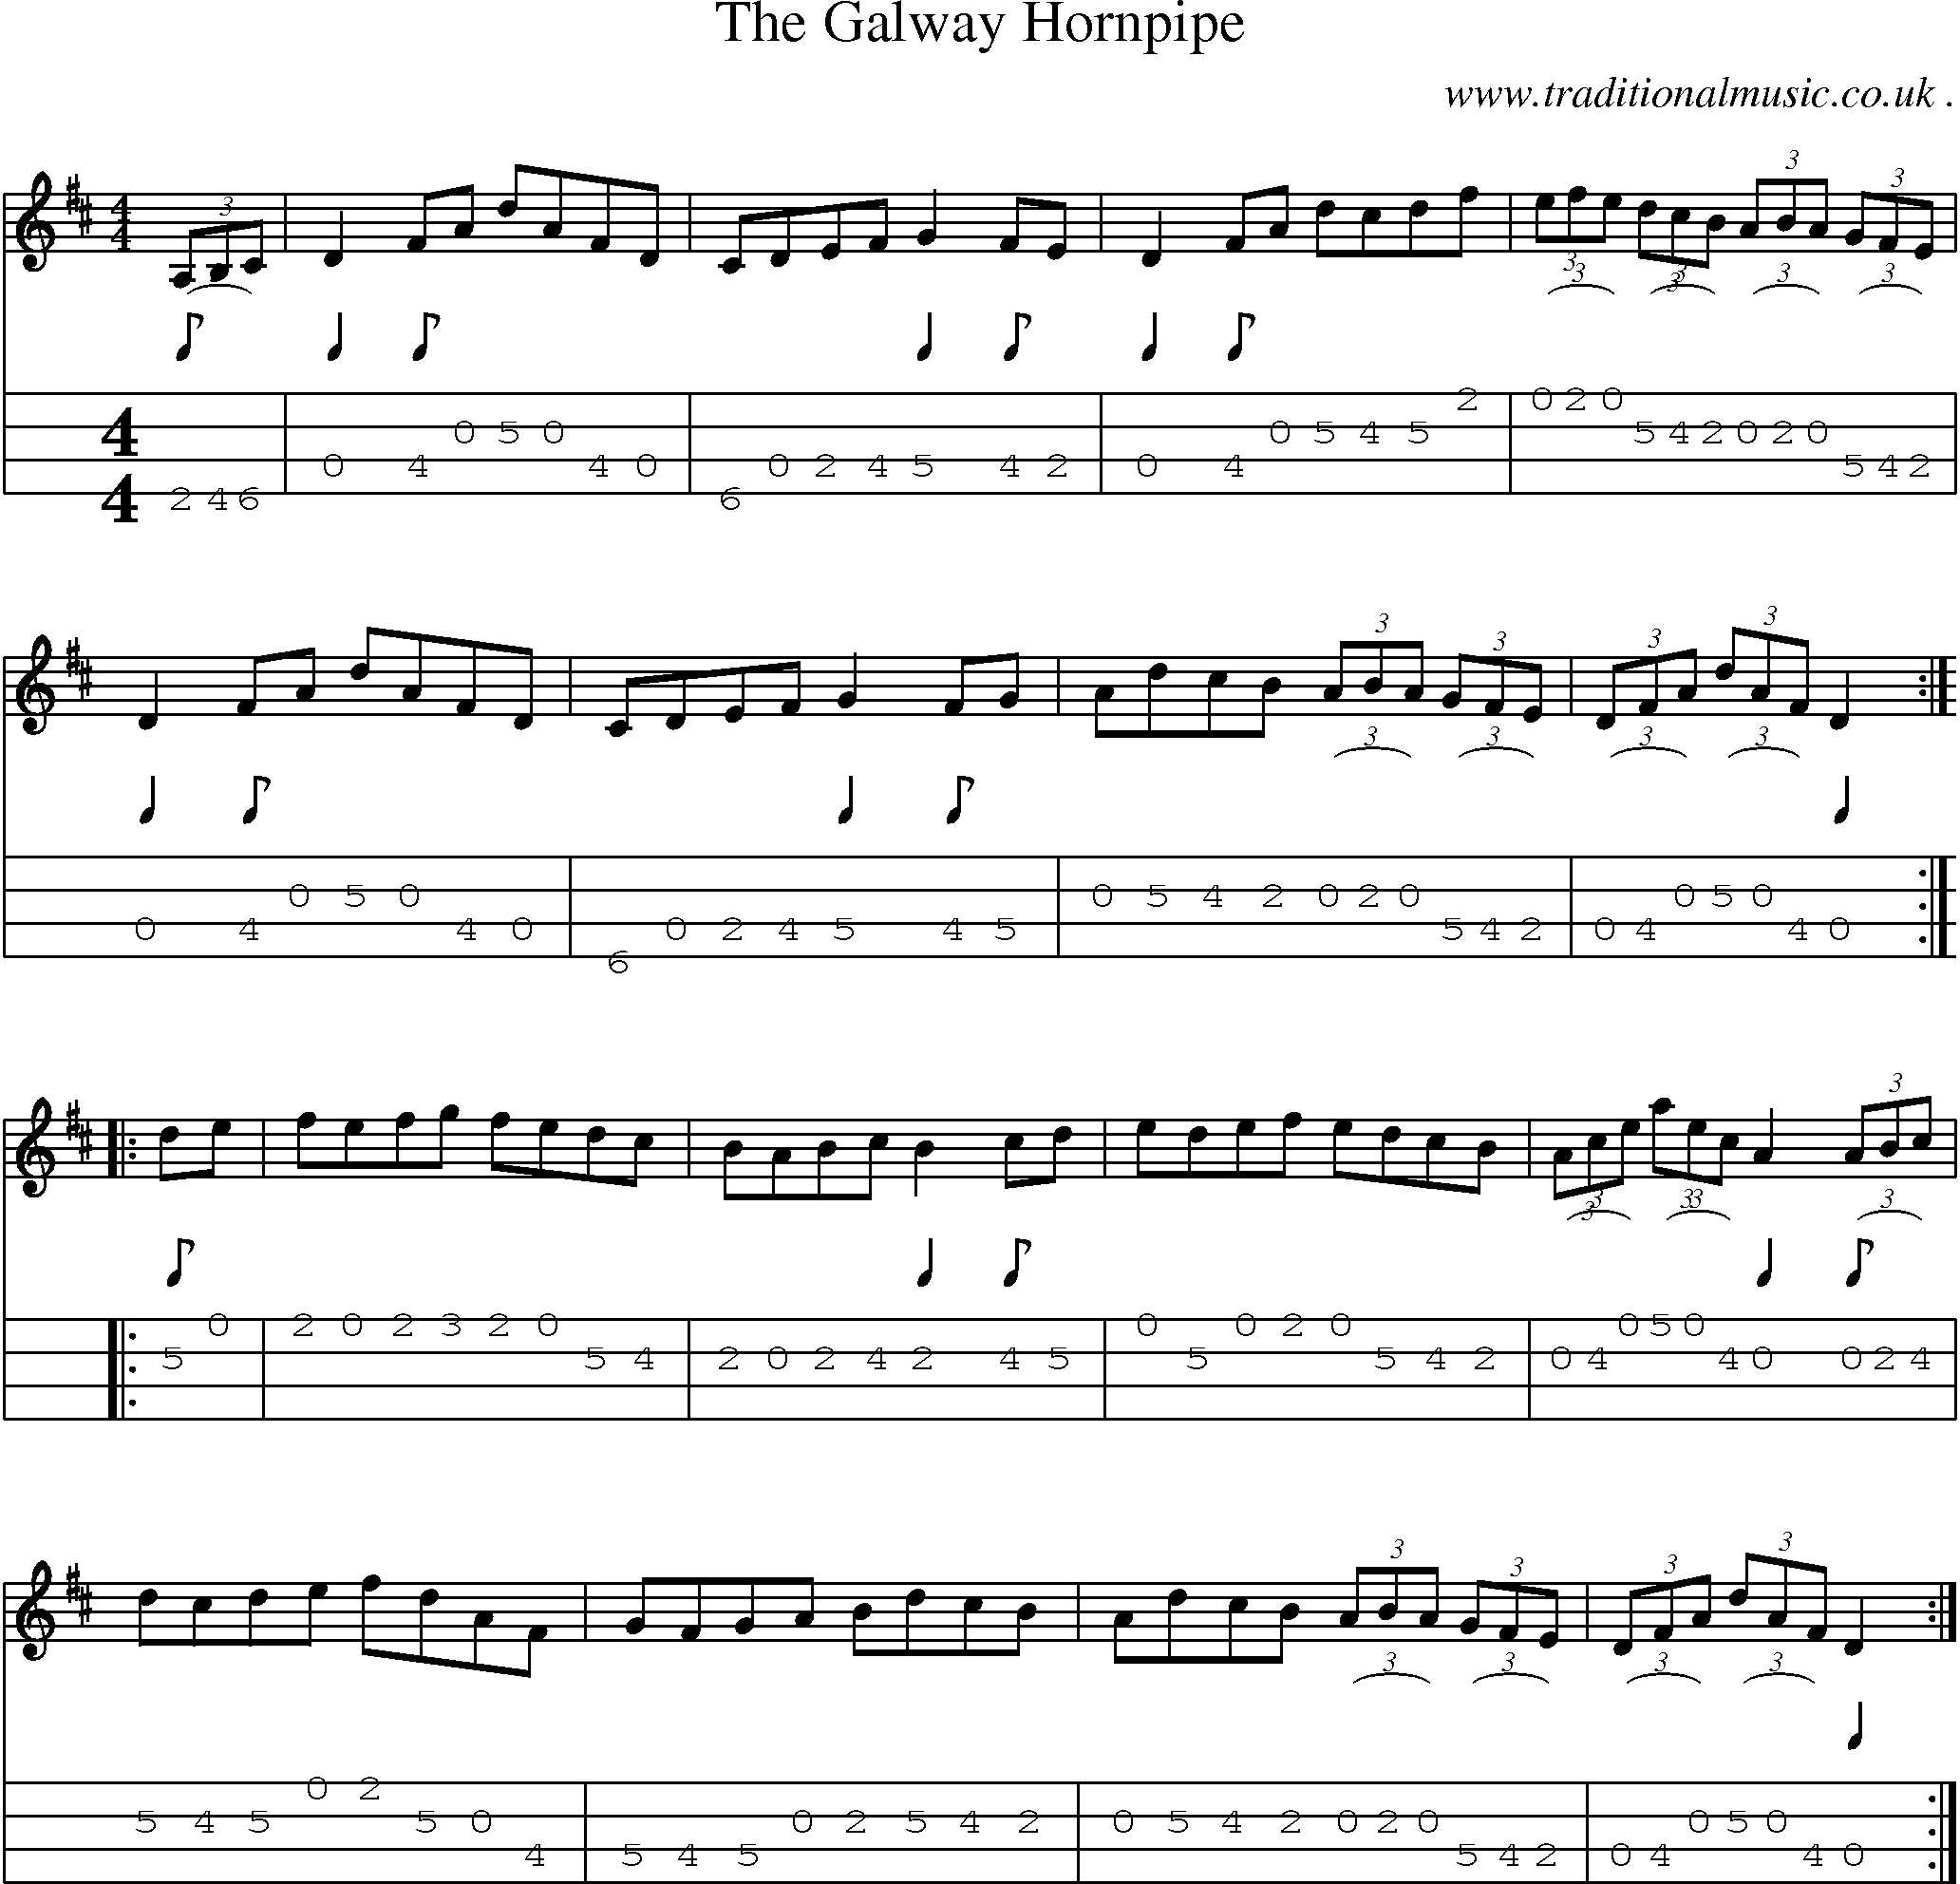 Sheet-Music and Mandolin Tabs for The Galway Hornpipe